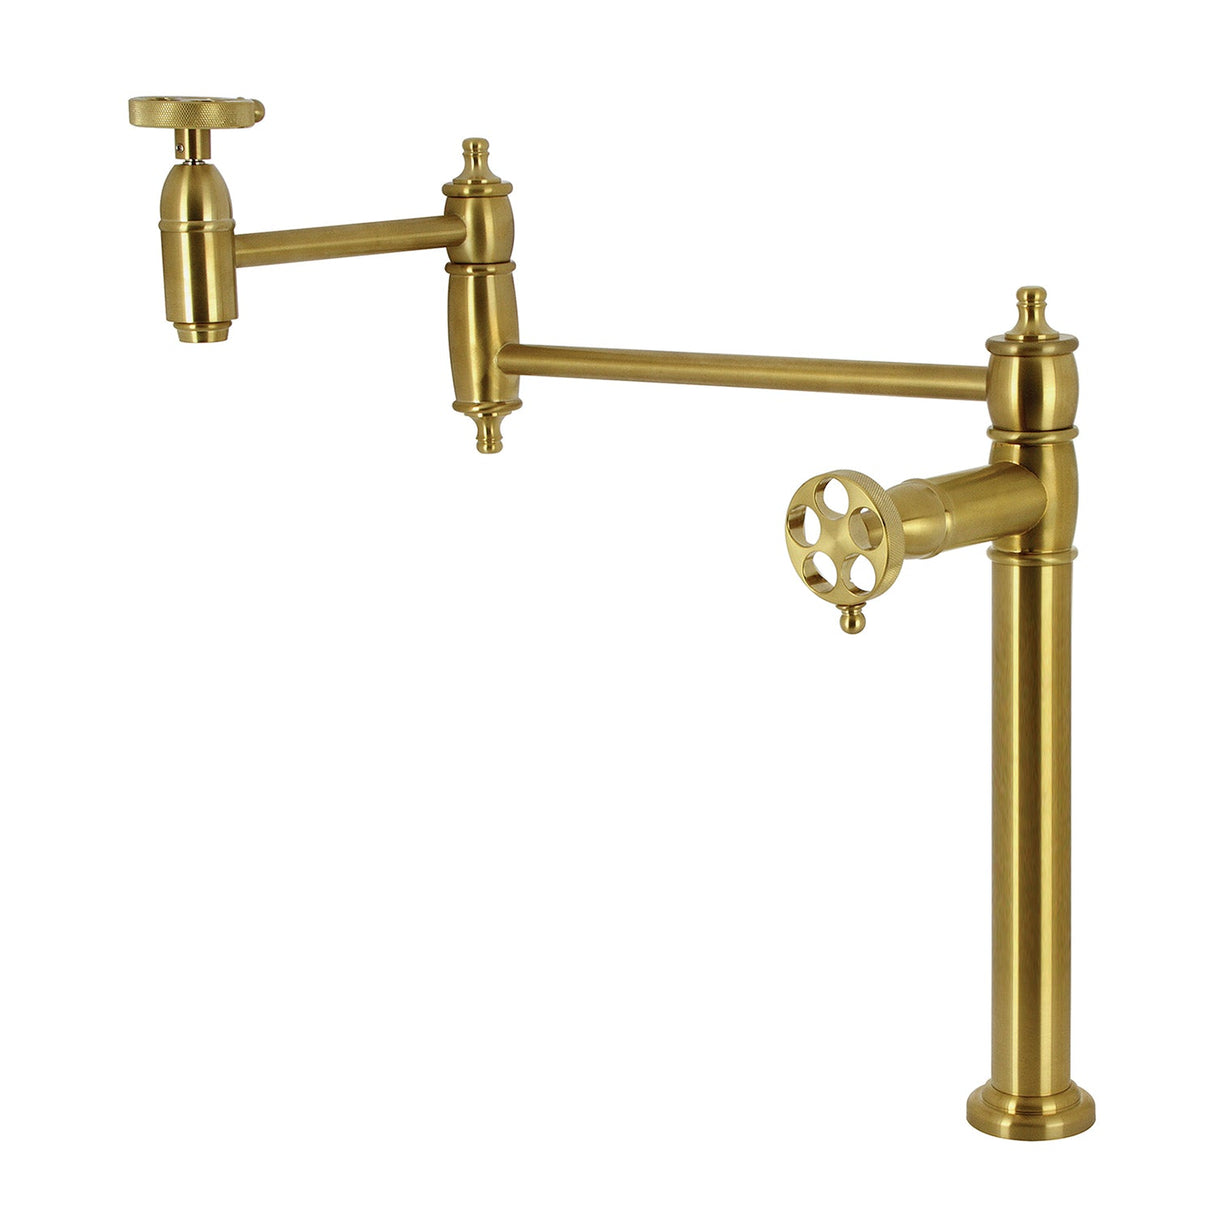 Wendell KS3707RKZ Two-Handle 1-Hole Deck Mount Pot Filler Faucet with Knurled Handle, Brushed Brass